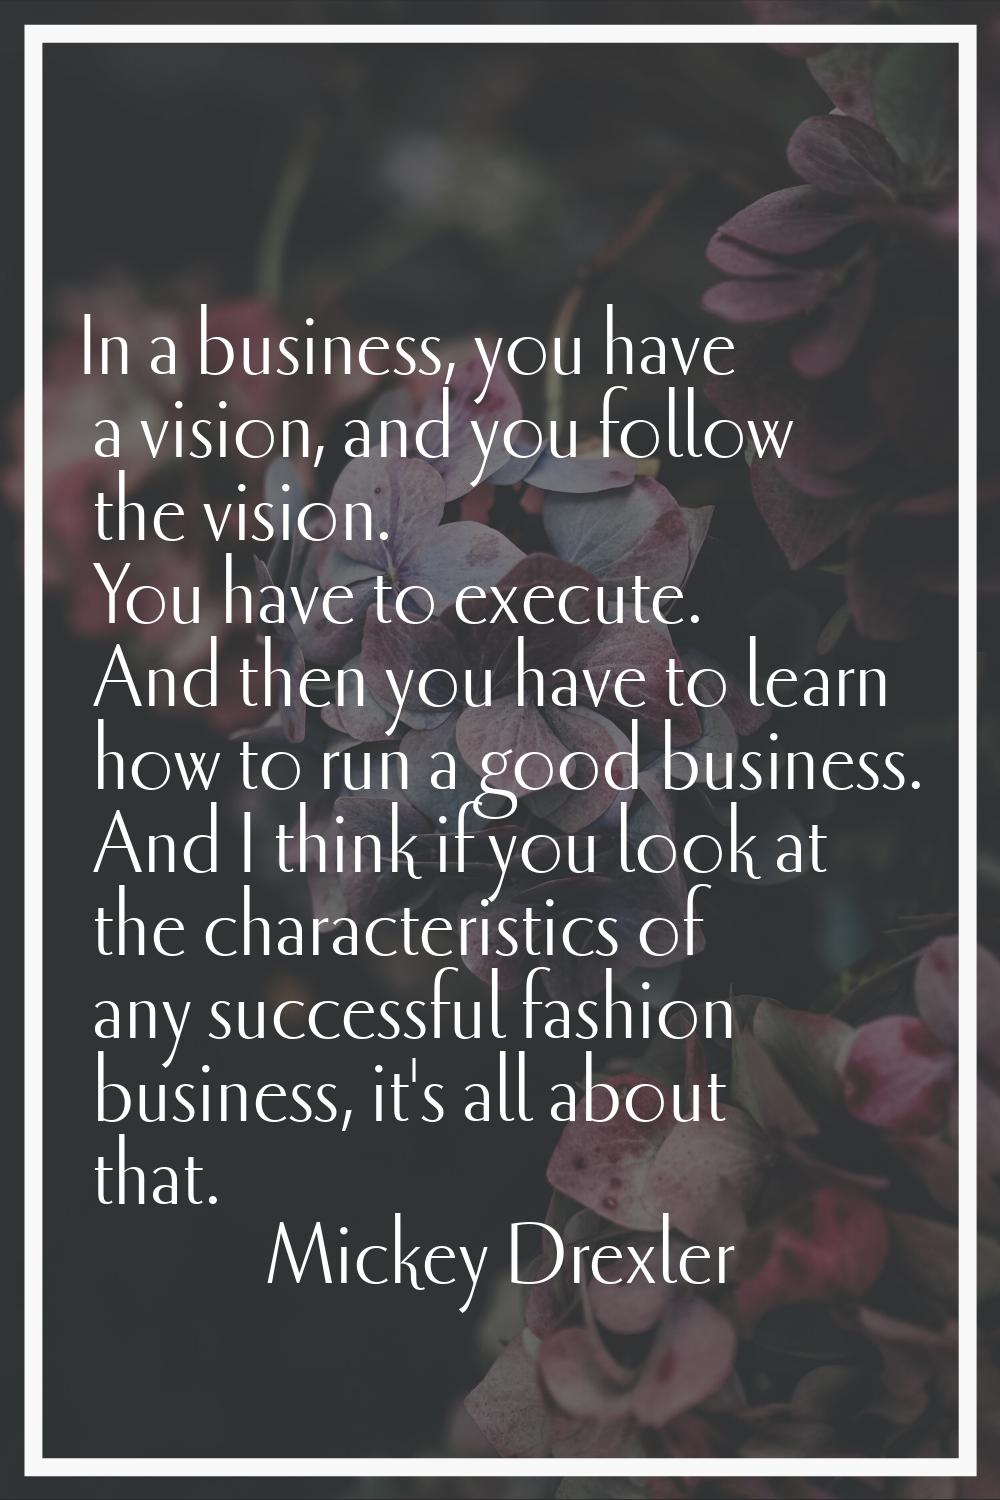 In a business, you have a vision, and you follow the vision. You have to execute. And then you have